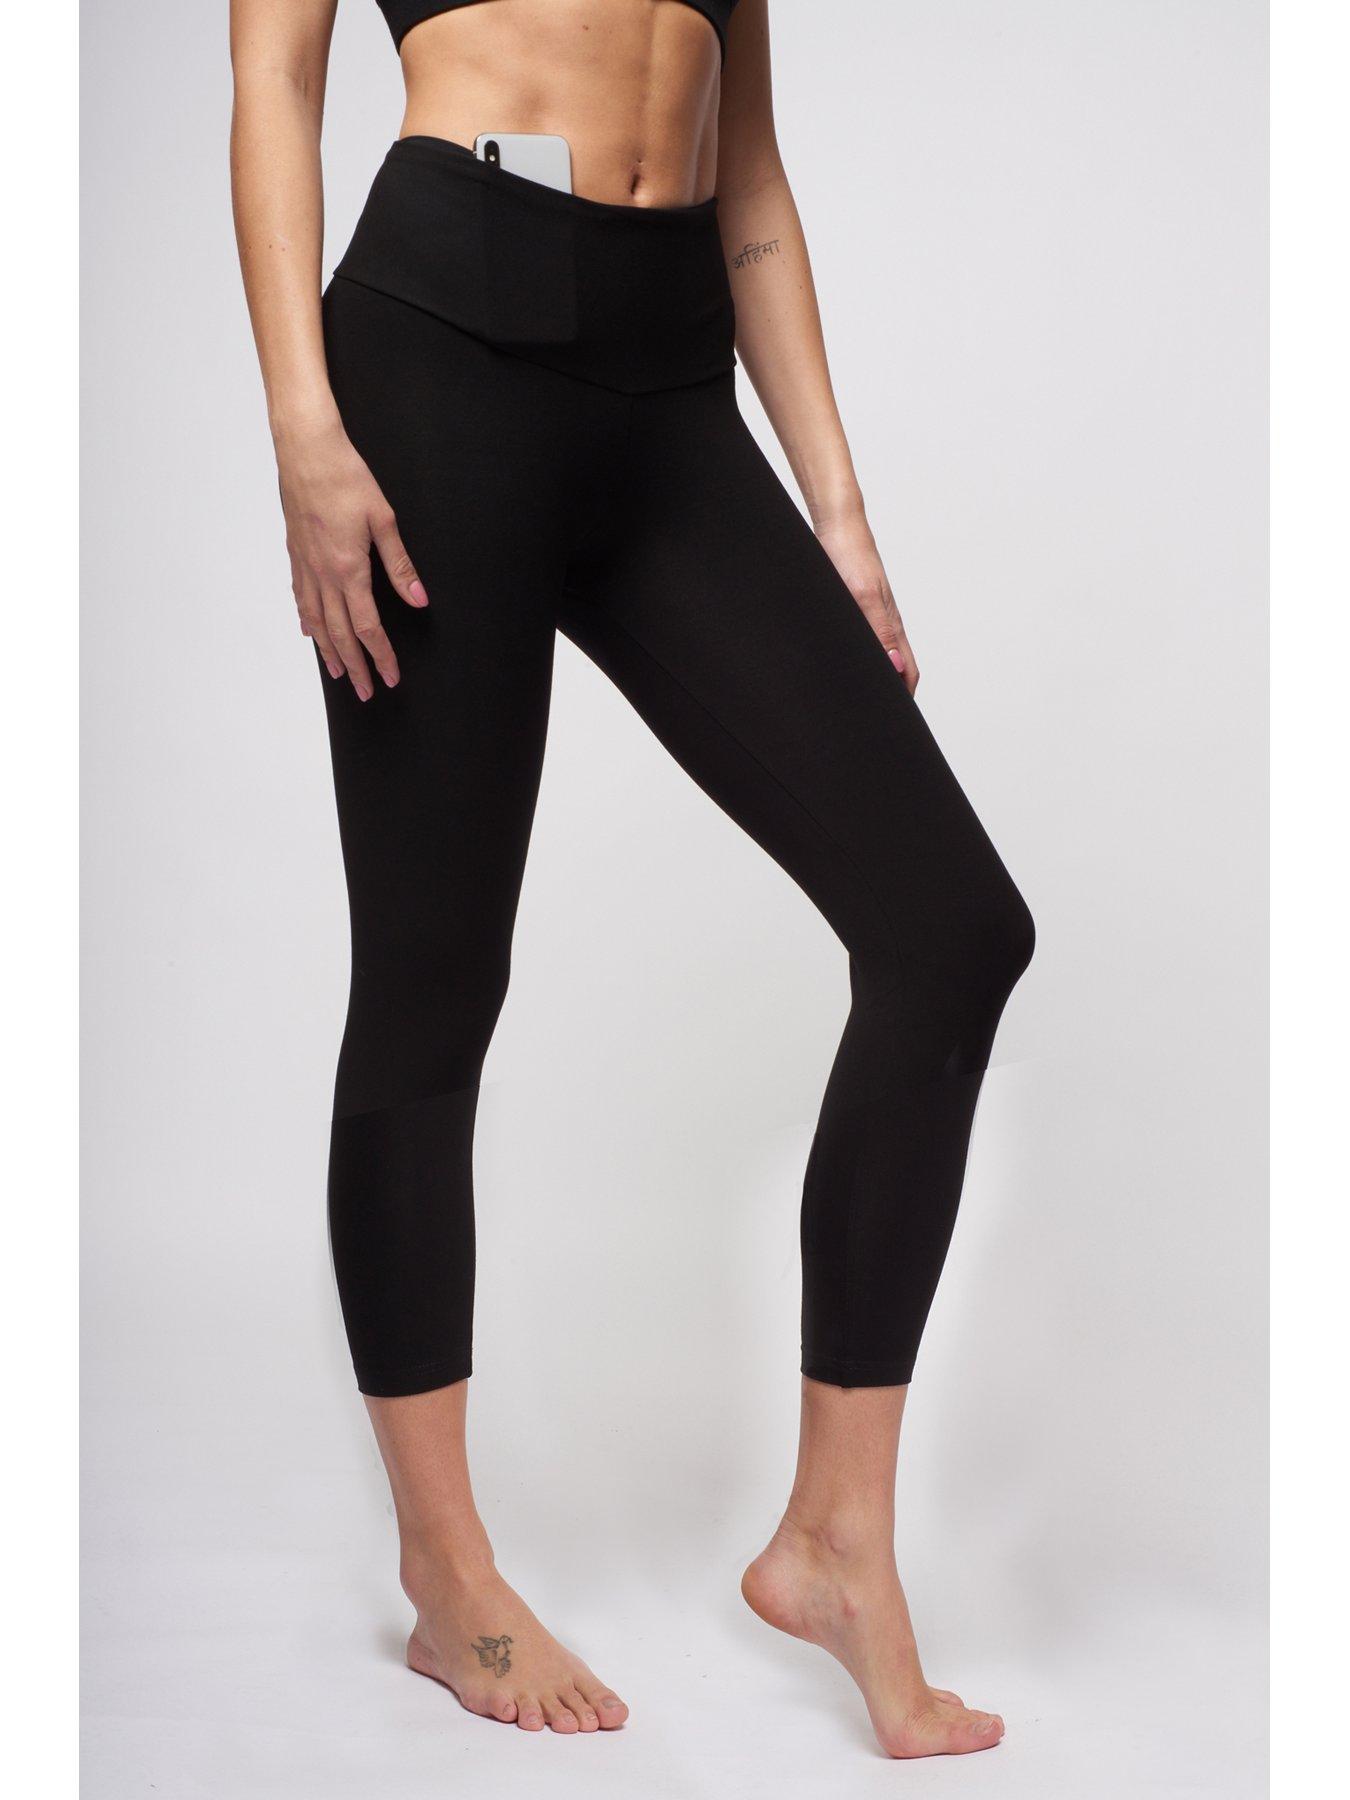 90 Degree By Reflex Liquid Look Combination Ankle Length Leggings